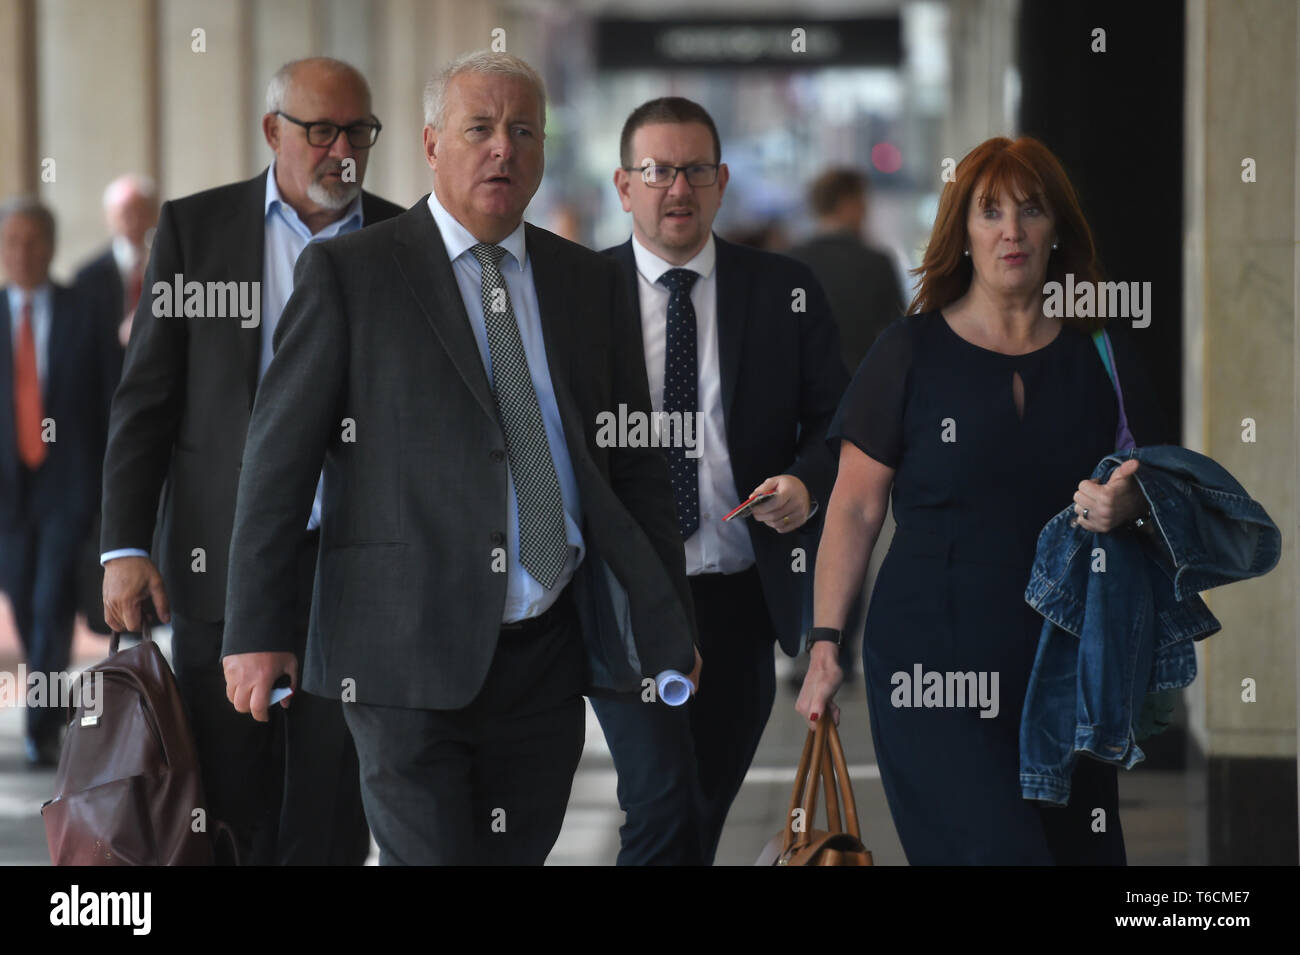 (left to right) Labour MPs Jon Trickett, Ian Lavery, Andrew Gwynne and Jeremy Corbyn's aide Karie Murphy arrive for an NEC meeting in London as the Labour Party's governing body gathers to agree its draft European elections manifesto. Stock Photo